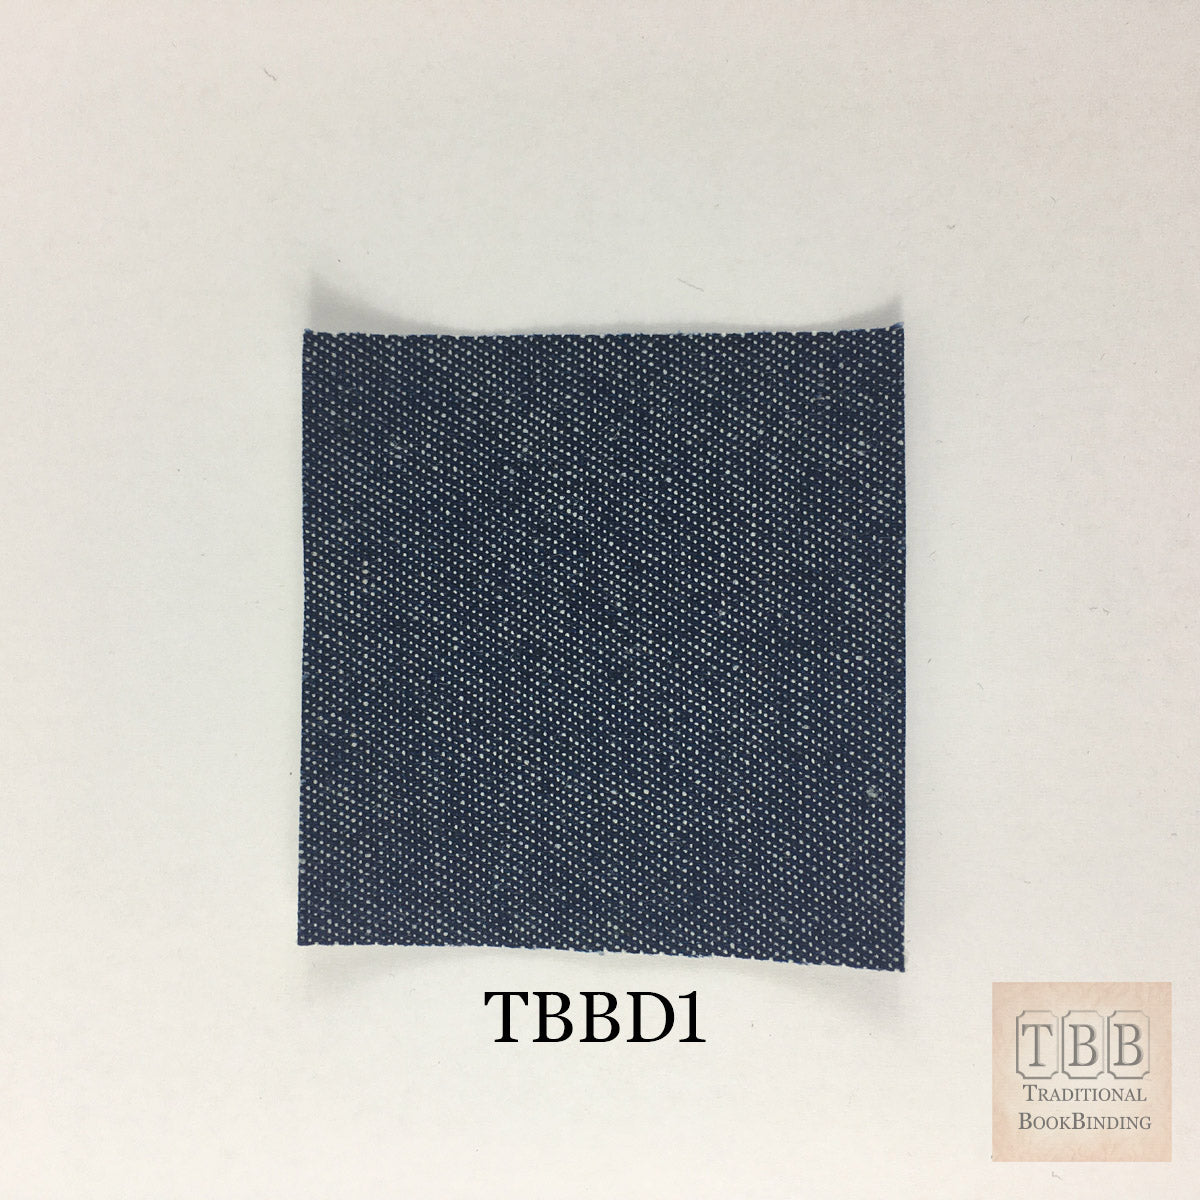 Denim Buckram- Durable bookbinding cloth with paper backing- TBBD1